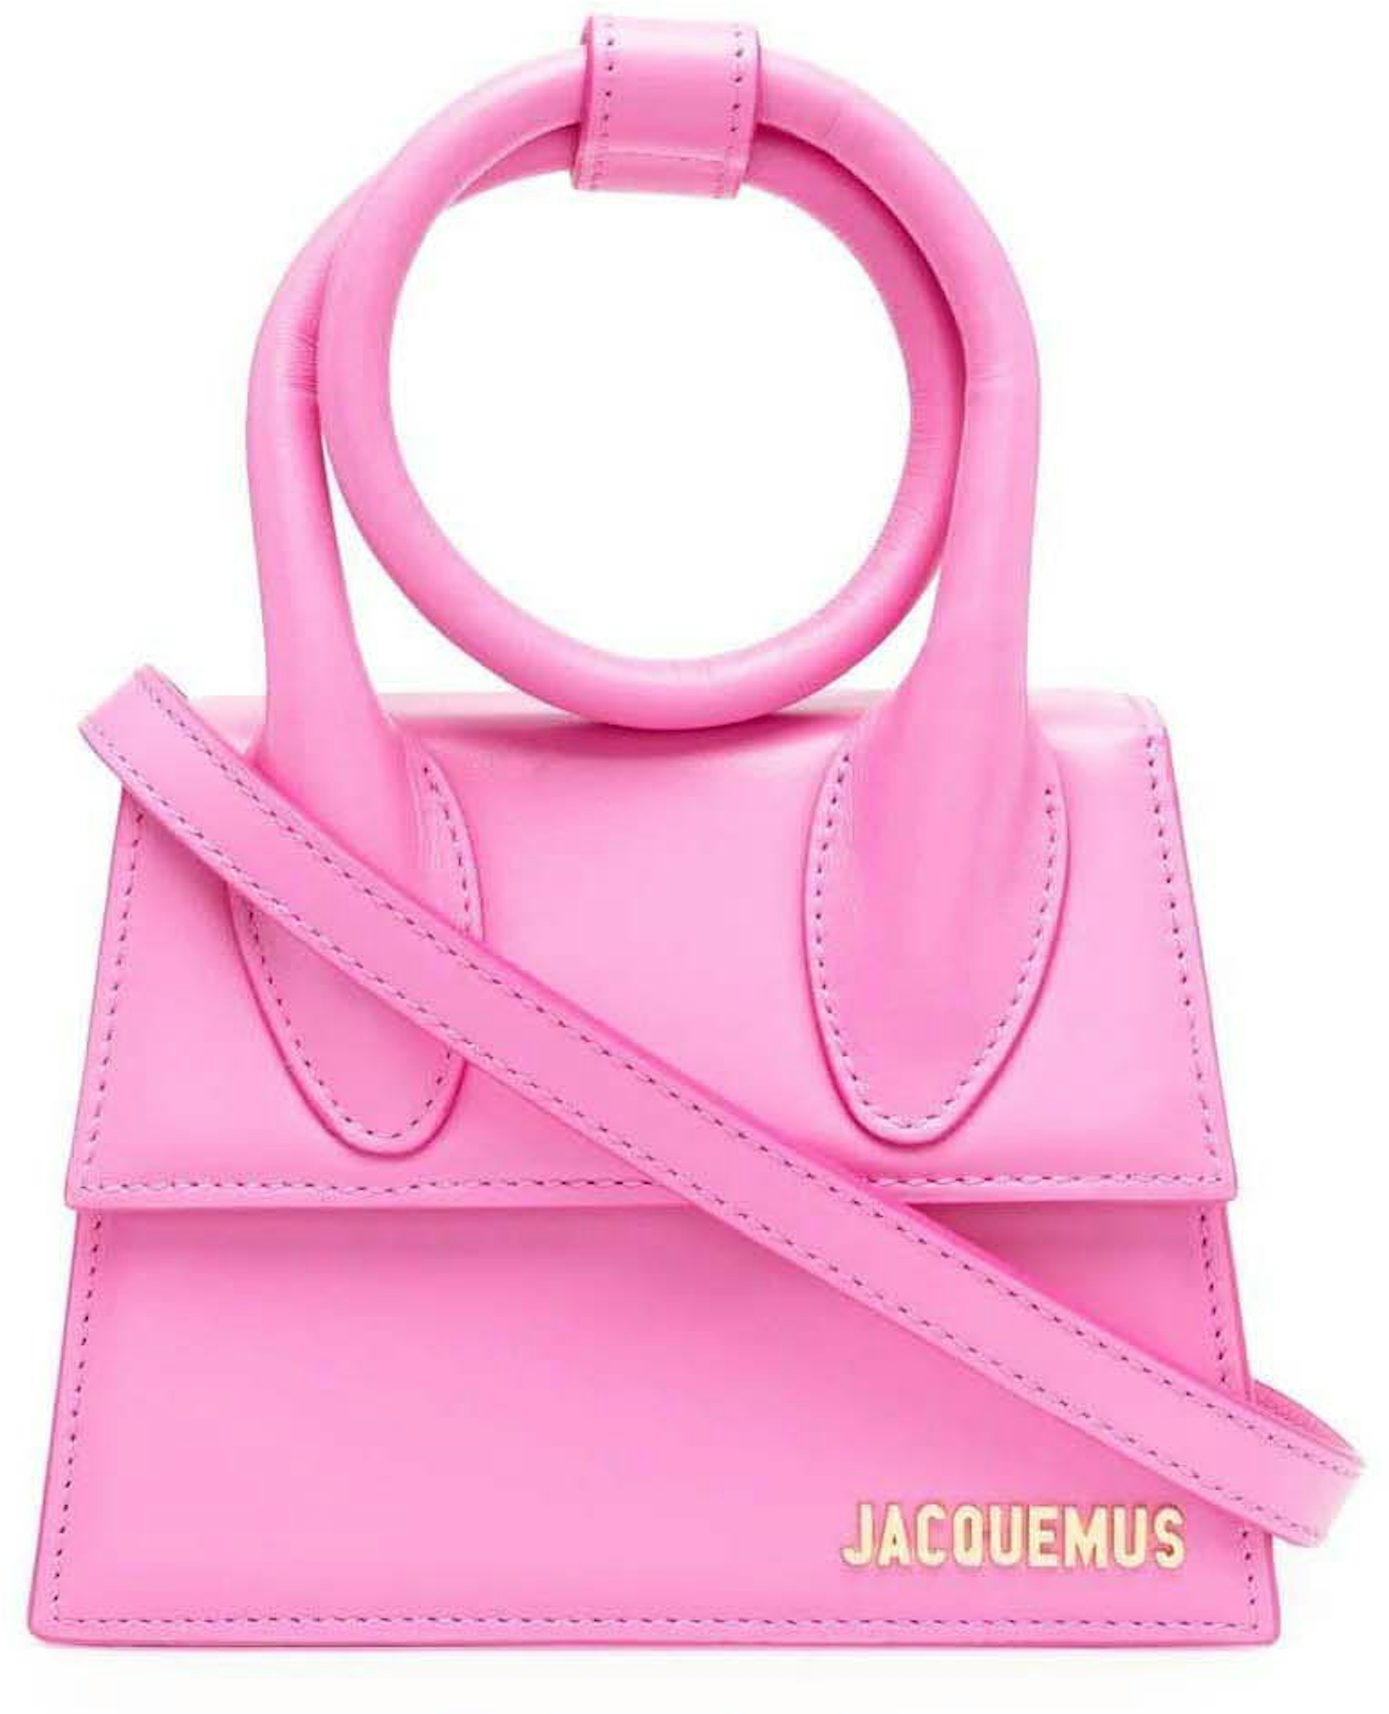 Jacquemus - Authenticated Le Chiquito Noeud Handbag - Leather Pink Plain for Women, Never Worn, with Tag